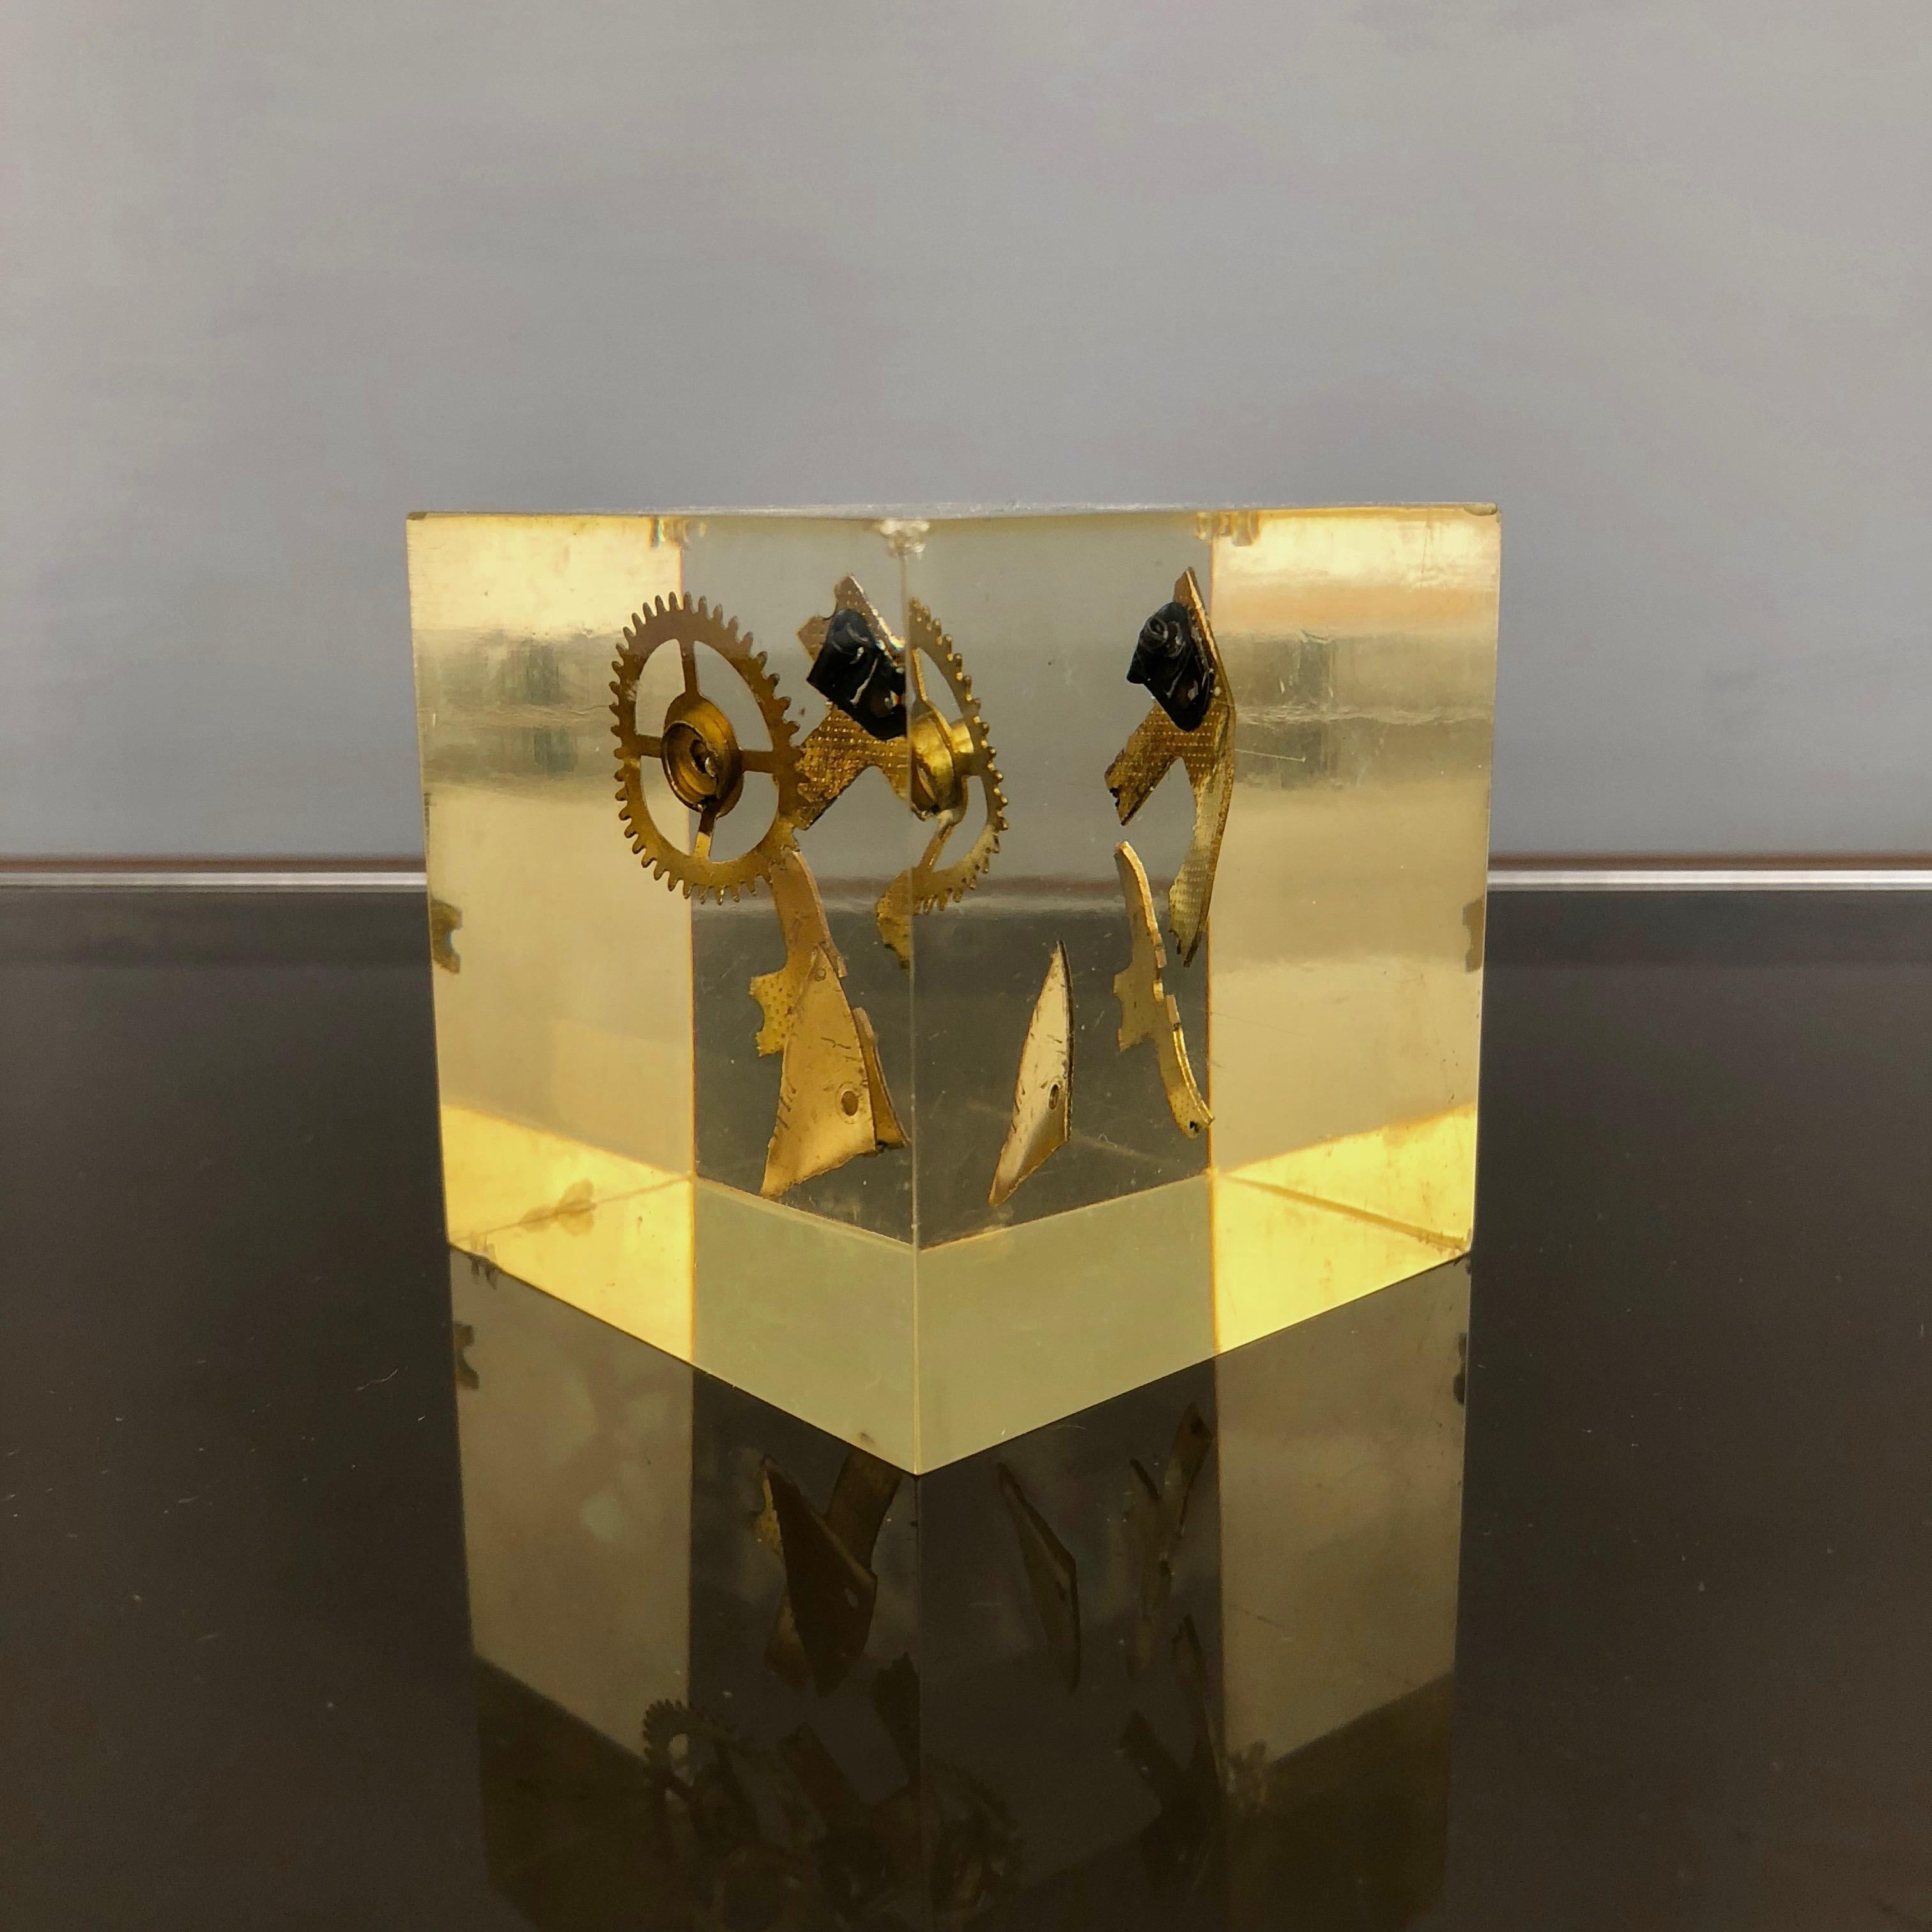 Modernist Lucite Resin Cube Sculpture with Gears Pierre Giraudon, France, 1970s For Sale 1